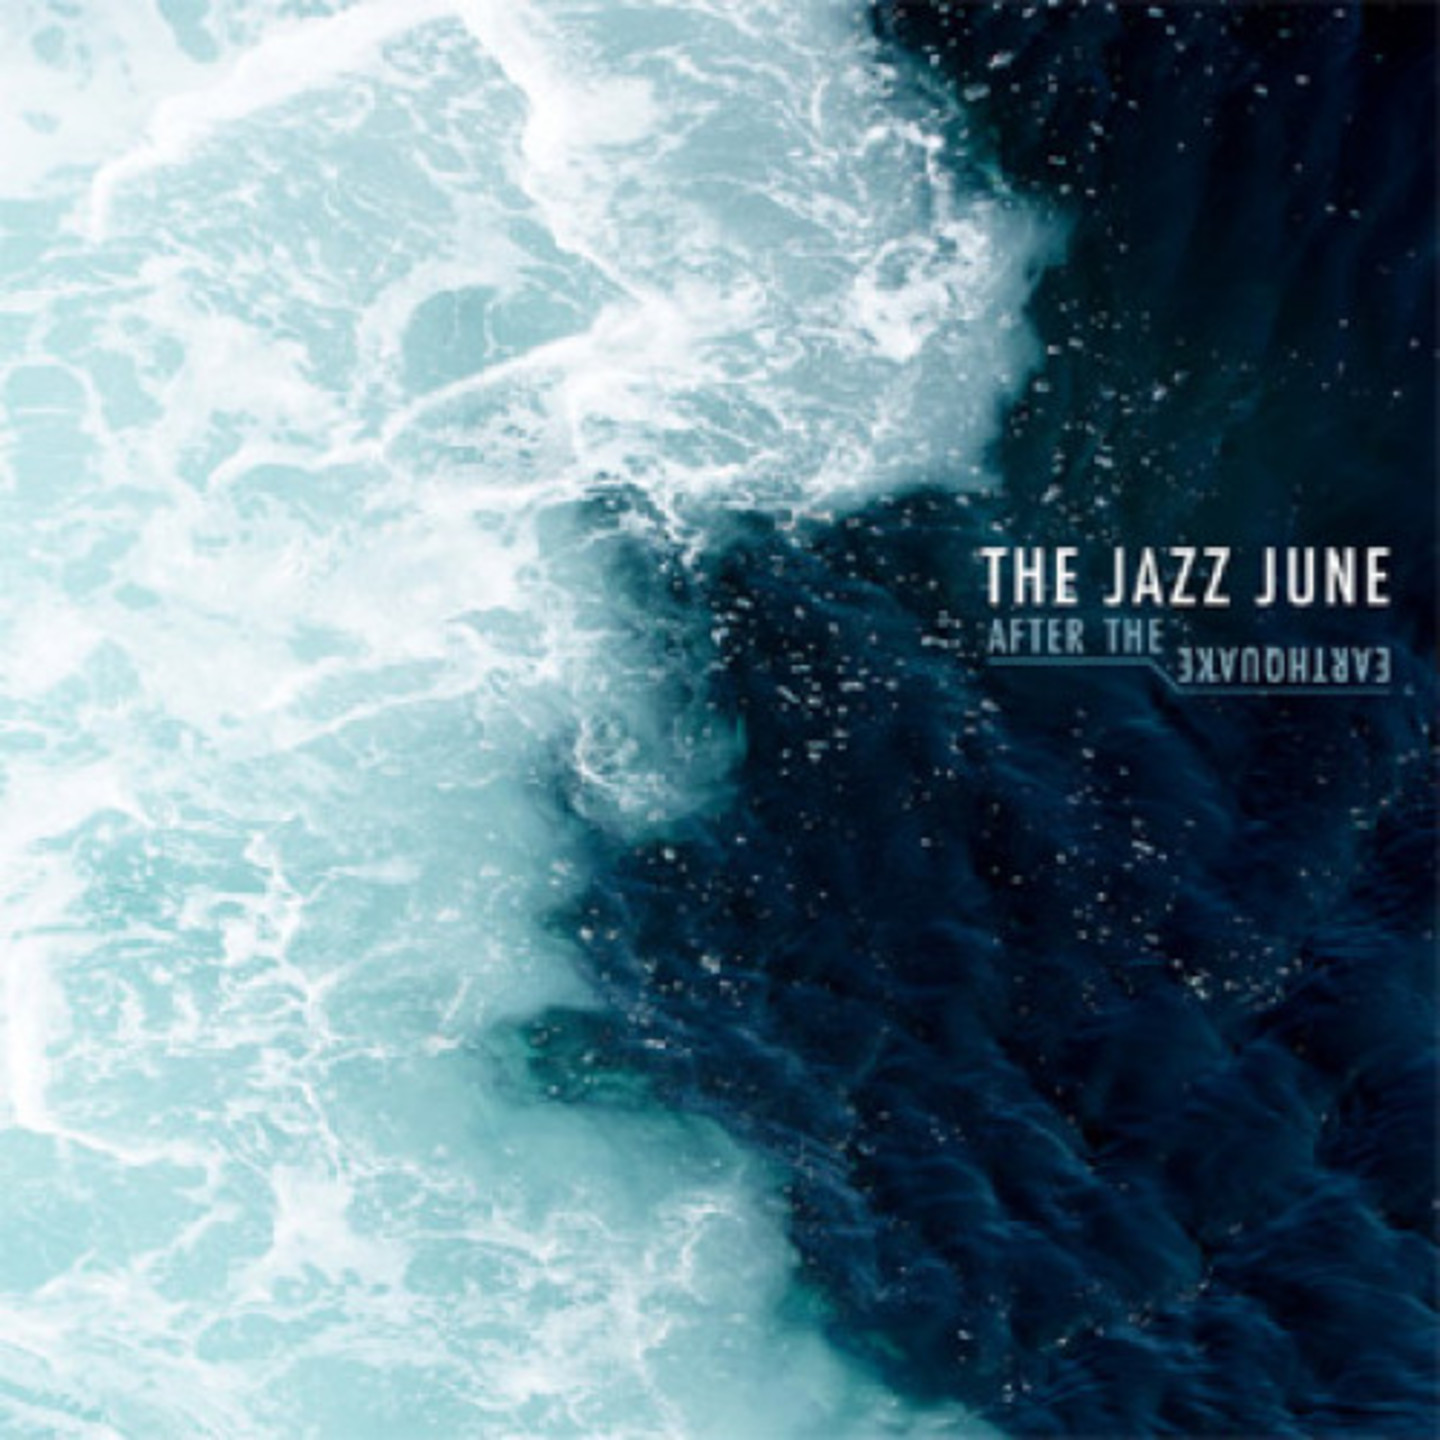 JAZZ JUNE, THE - After The Earthquake LP